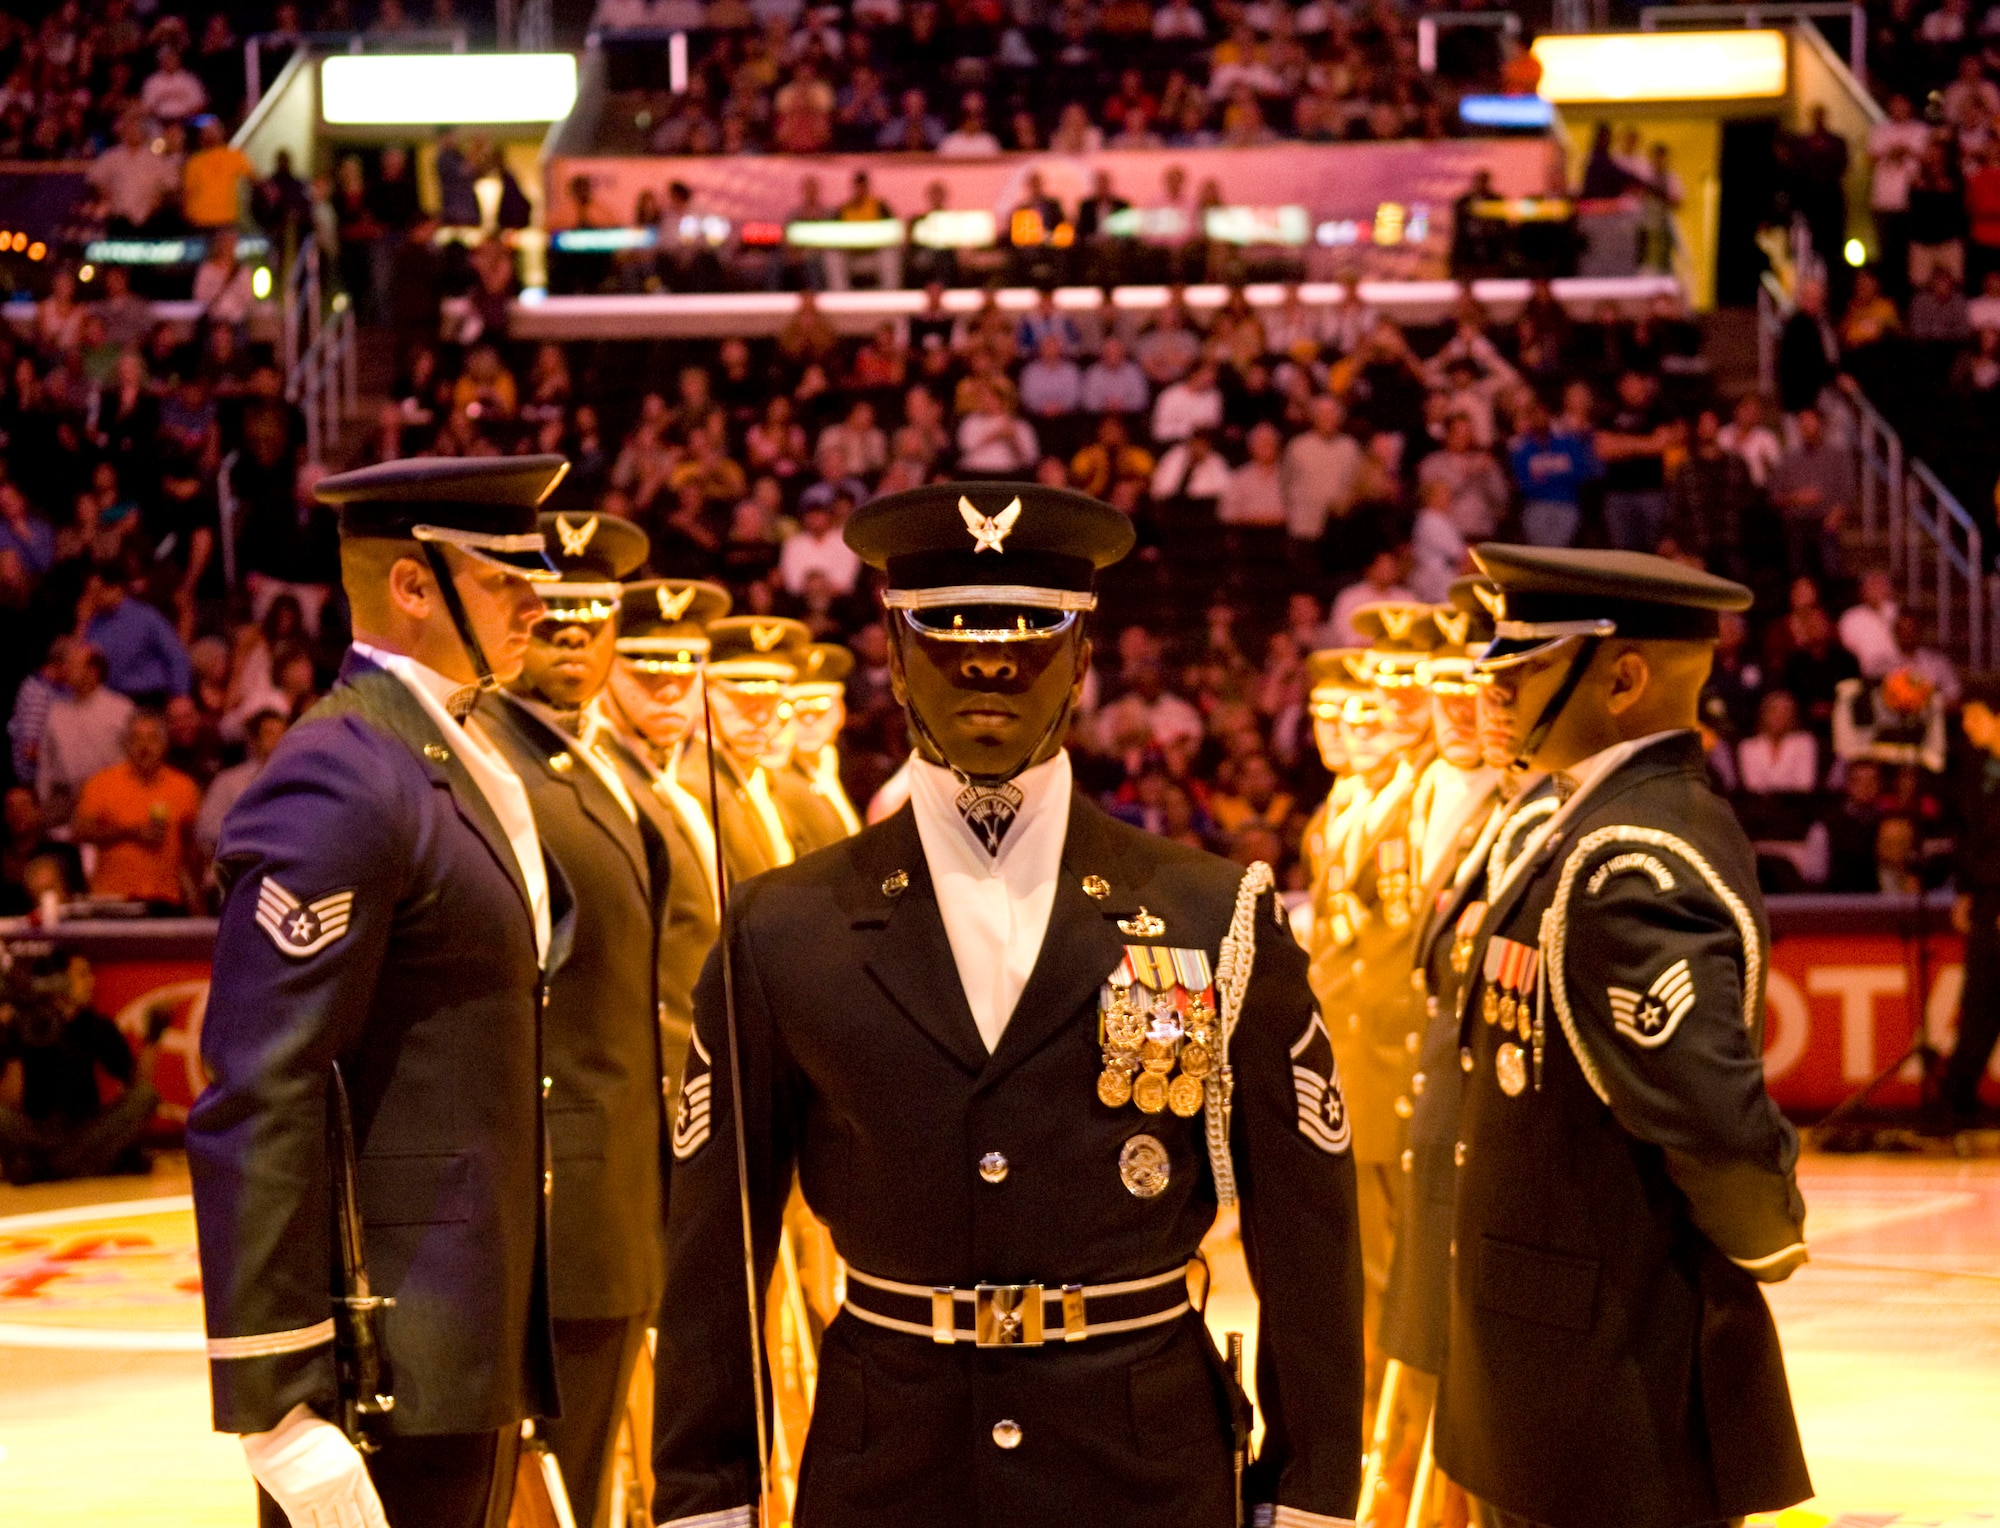 The Air Force Honor Guard drill team performs during a nationally telecast Chicago Bulls and Los Angeles Lakers basketball game in front of nearly 20,000 fans Nov. 18 at the Staples Center in Los Angeles. (U.S. Air Force photo/Staff Sgt. Raymond Hoy) 
